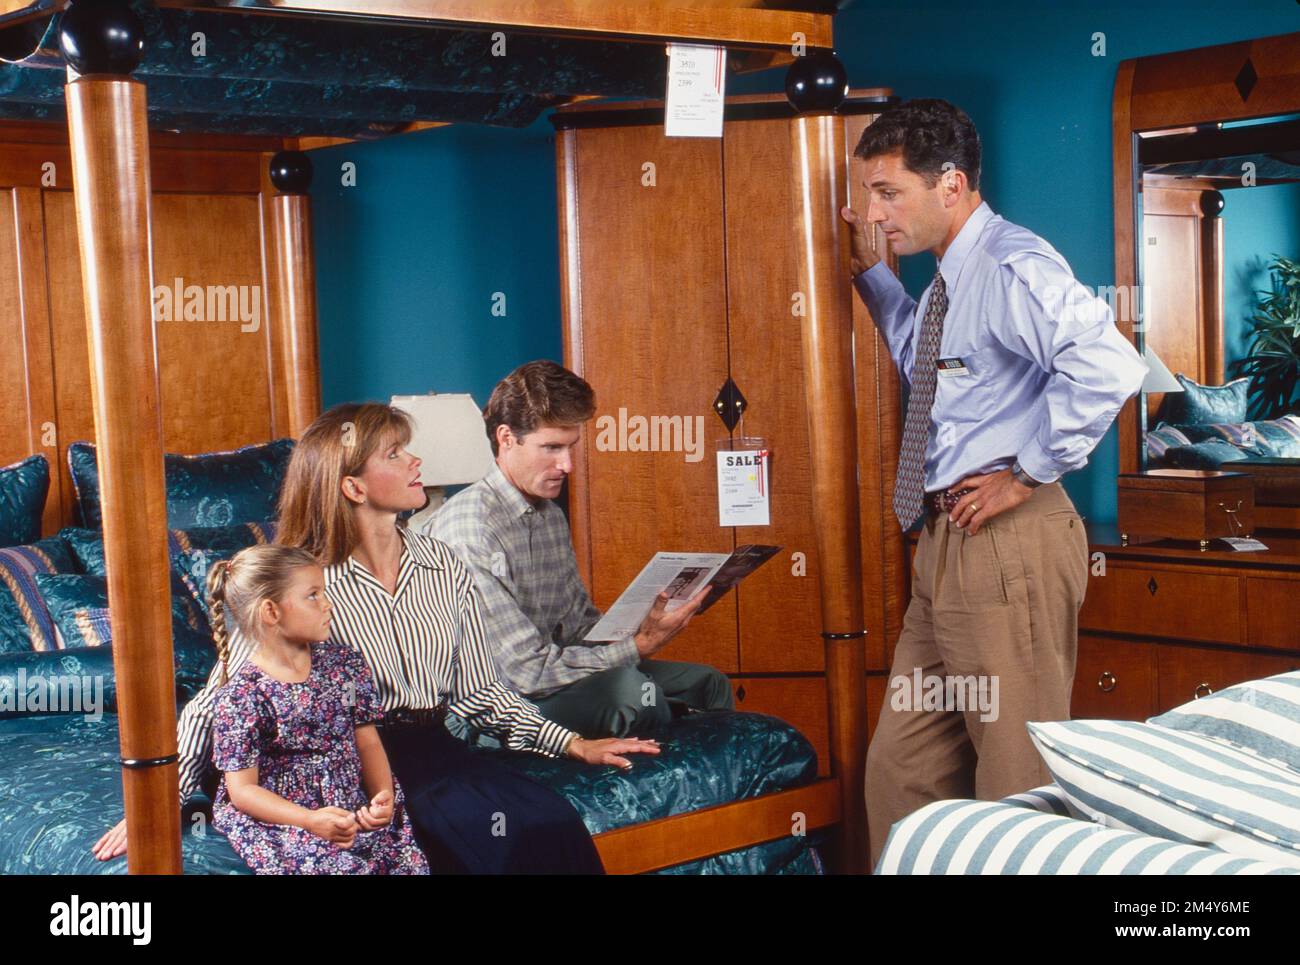 Young family, husband, wife and daughter sitting on a bed in a furniture store, speaking to the salesman Stock Photo